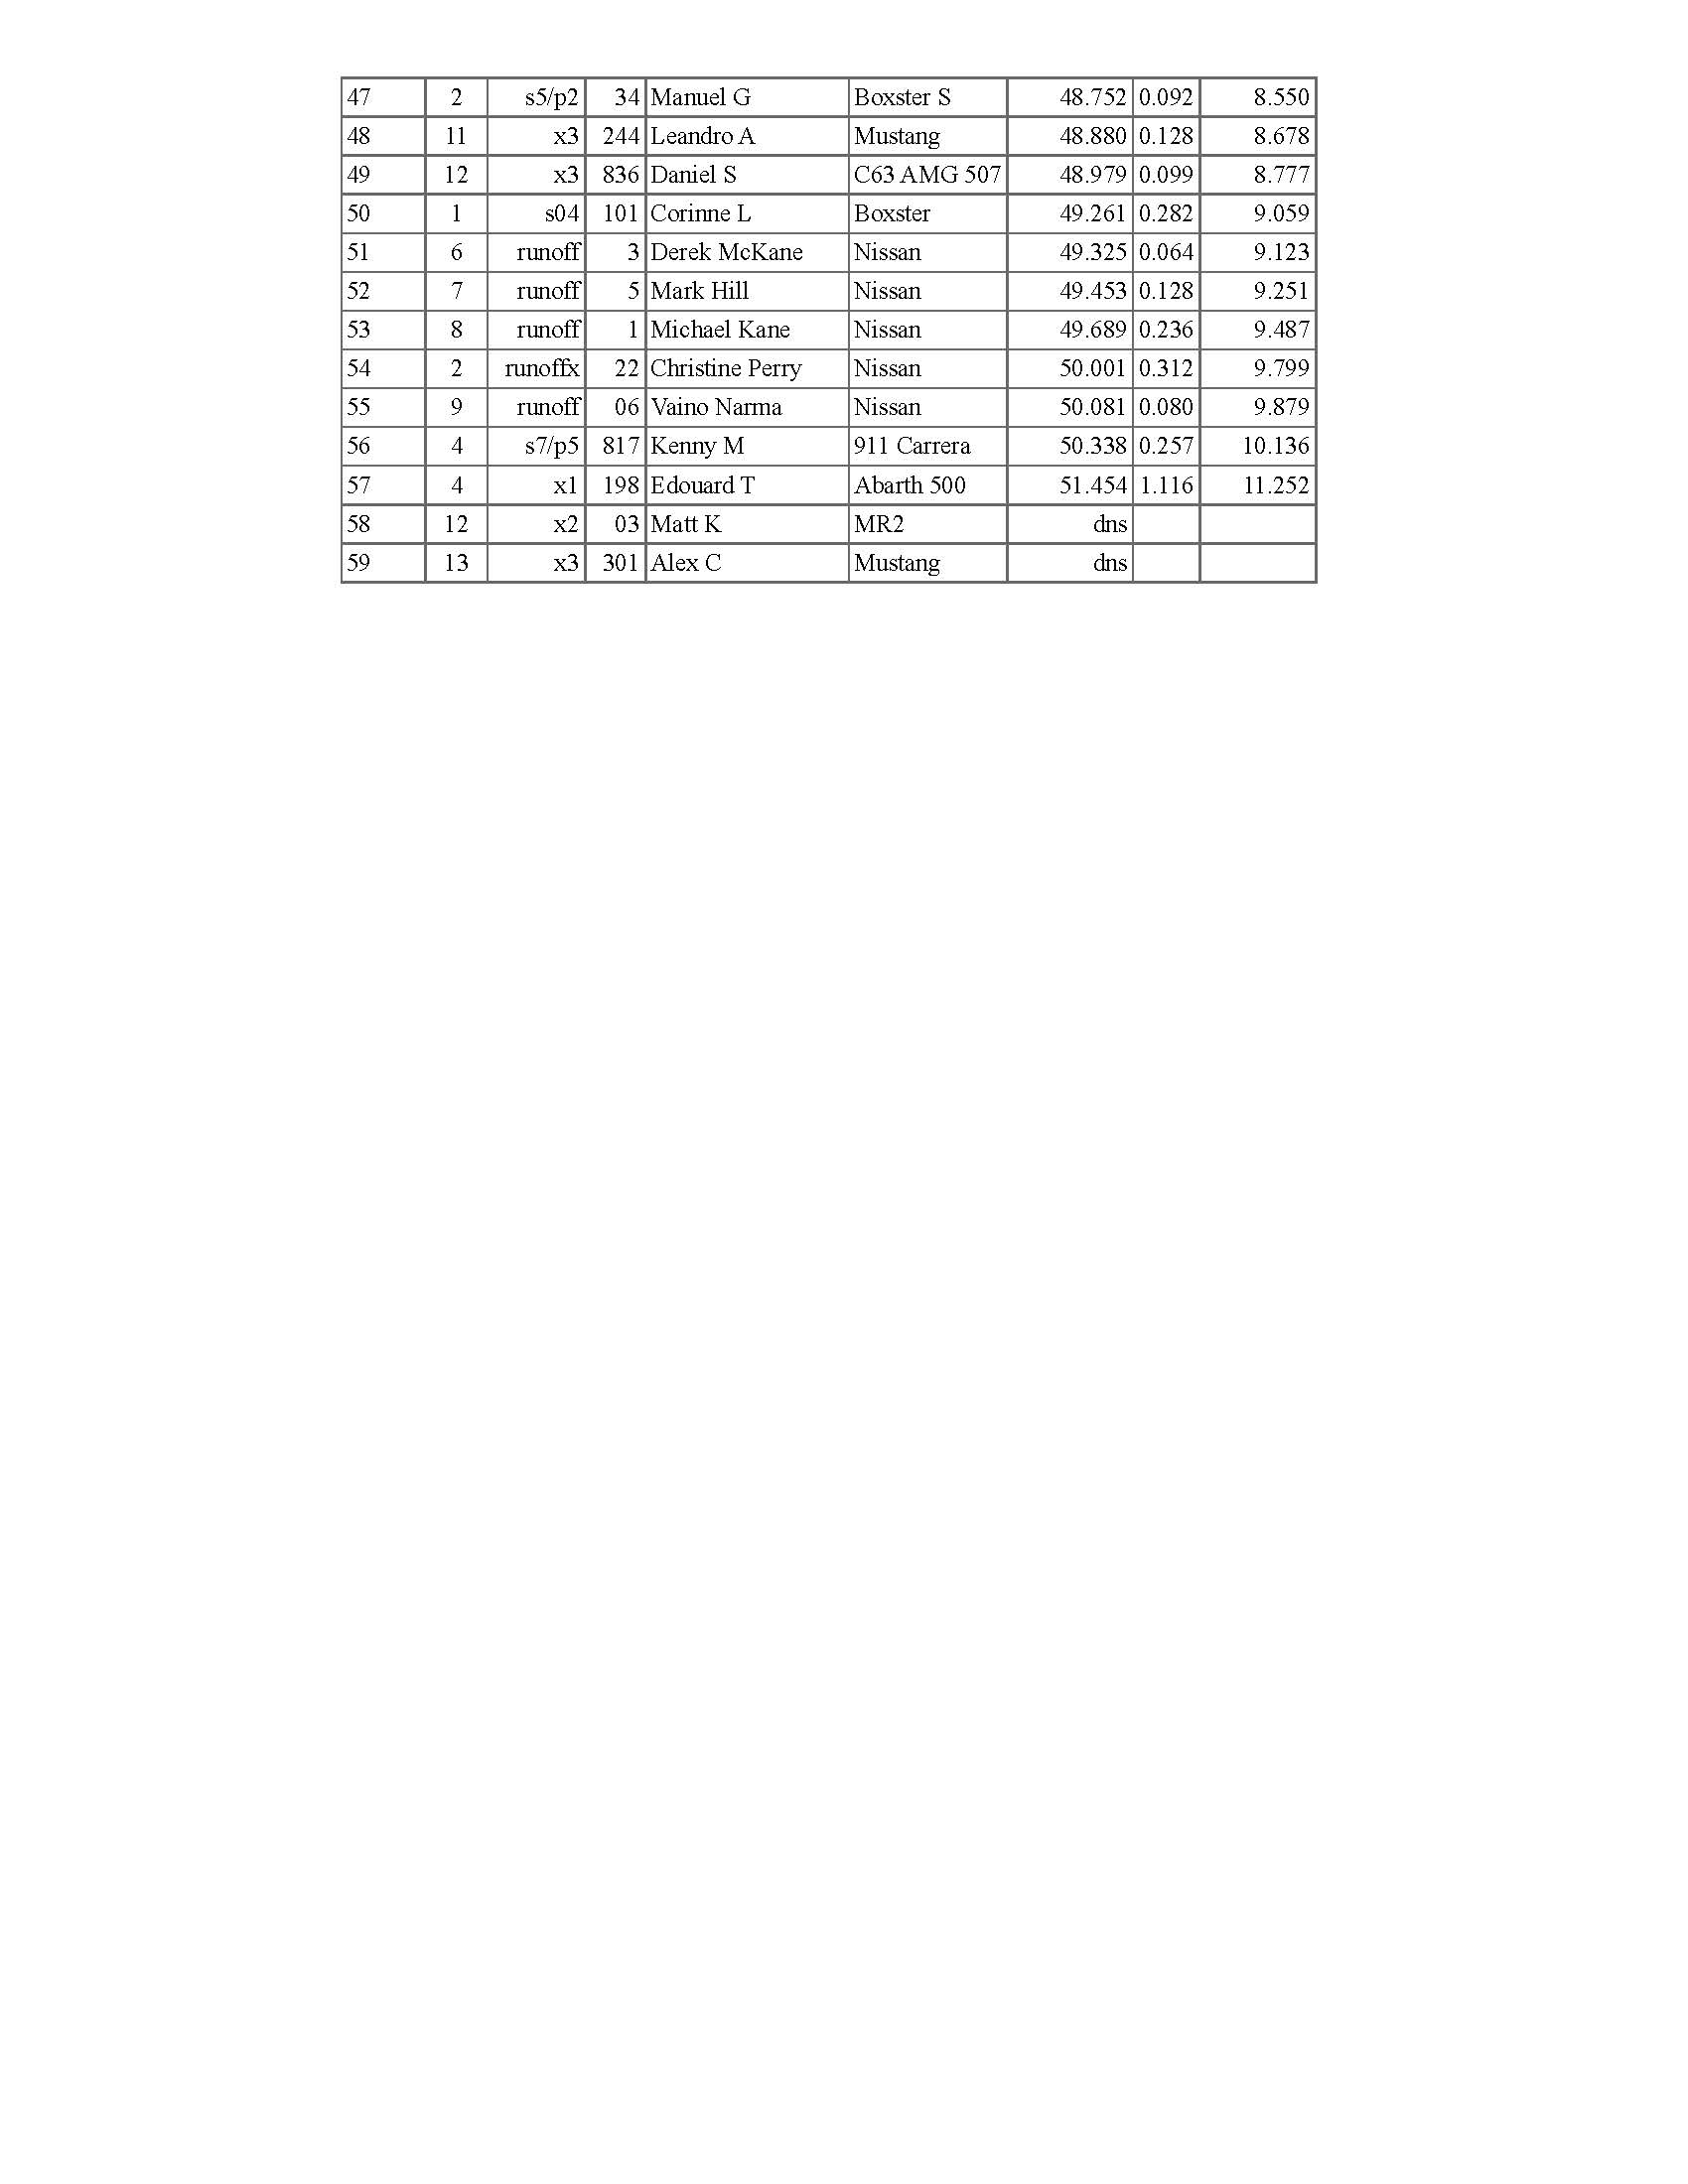 Back to Tobay Autocross   Summary Results Page 1